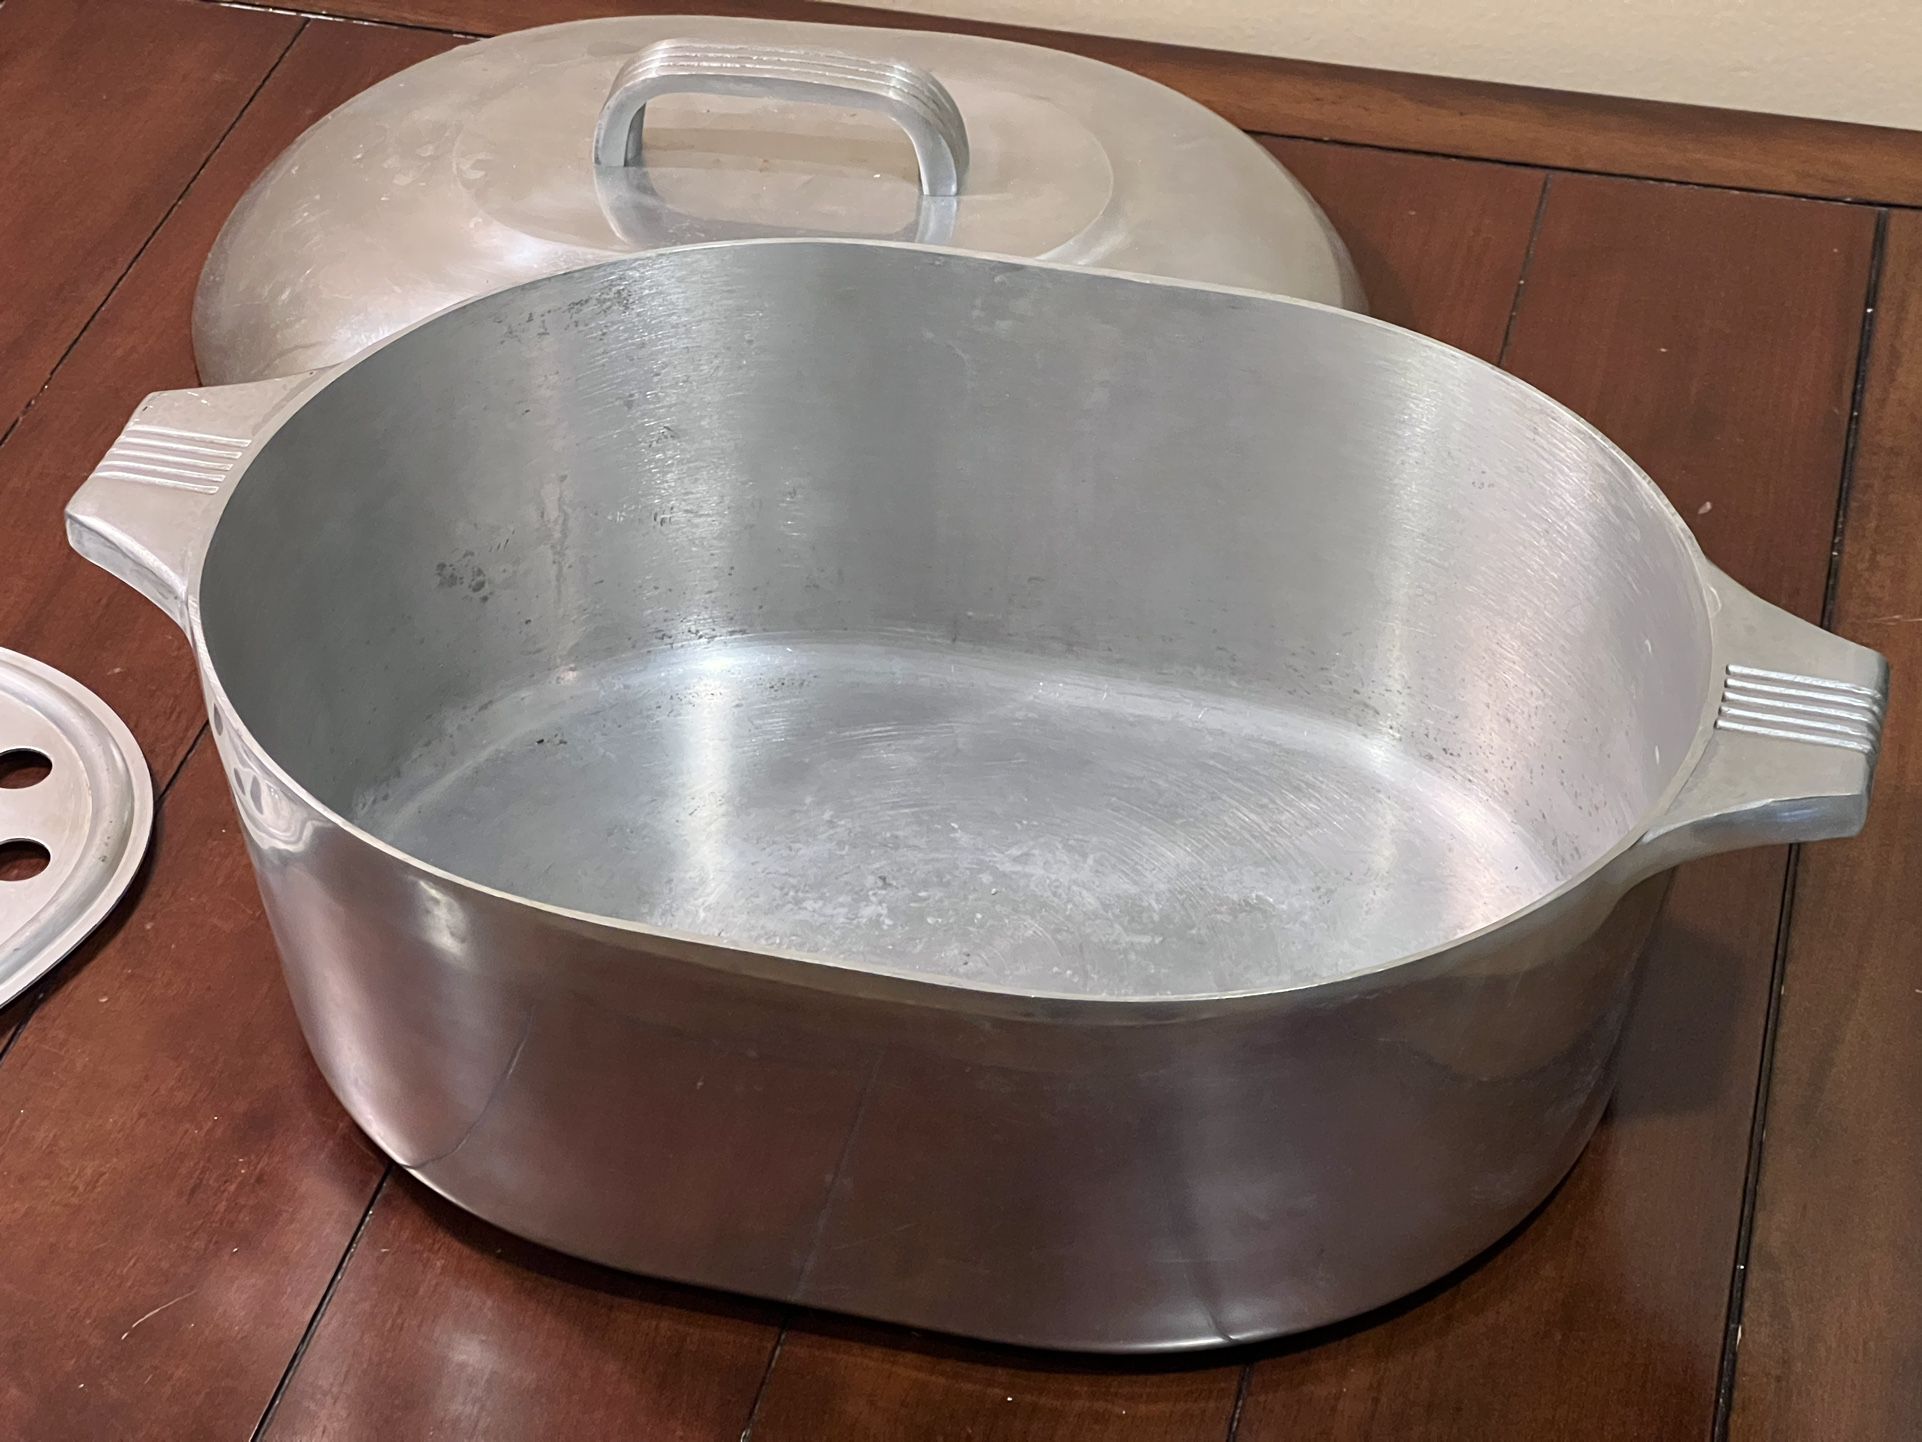 Large 8 Qts Vintage Dutch Oven, Magnalite Dutch Oven Made in the